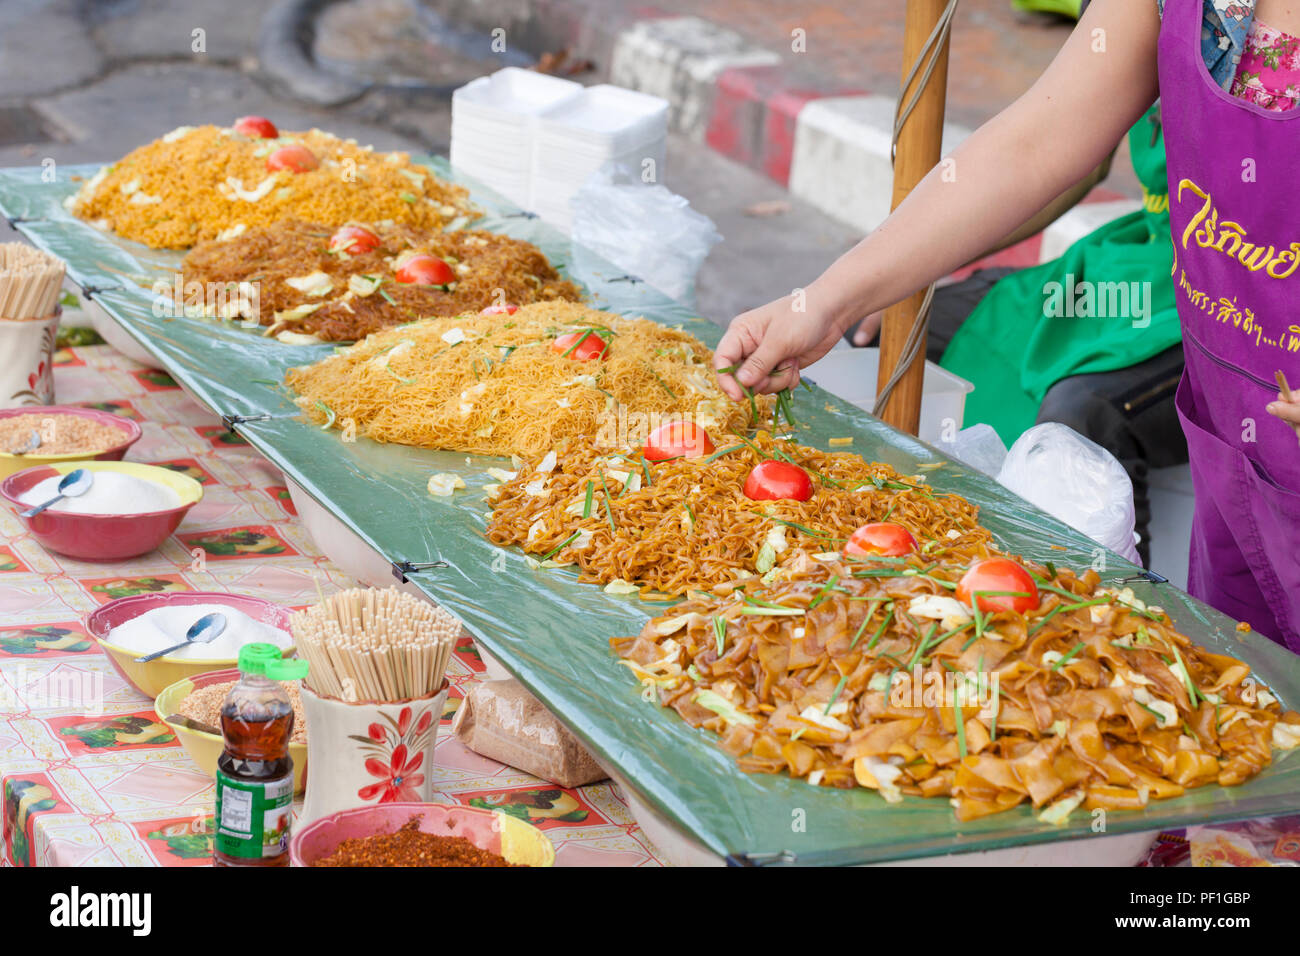 Different types of stir fried noodles on display, Thailand Stock Photo